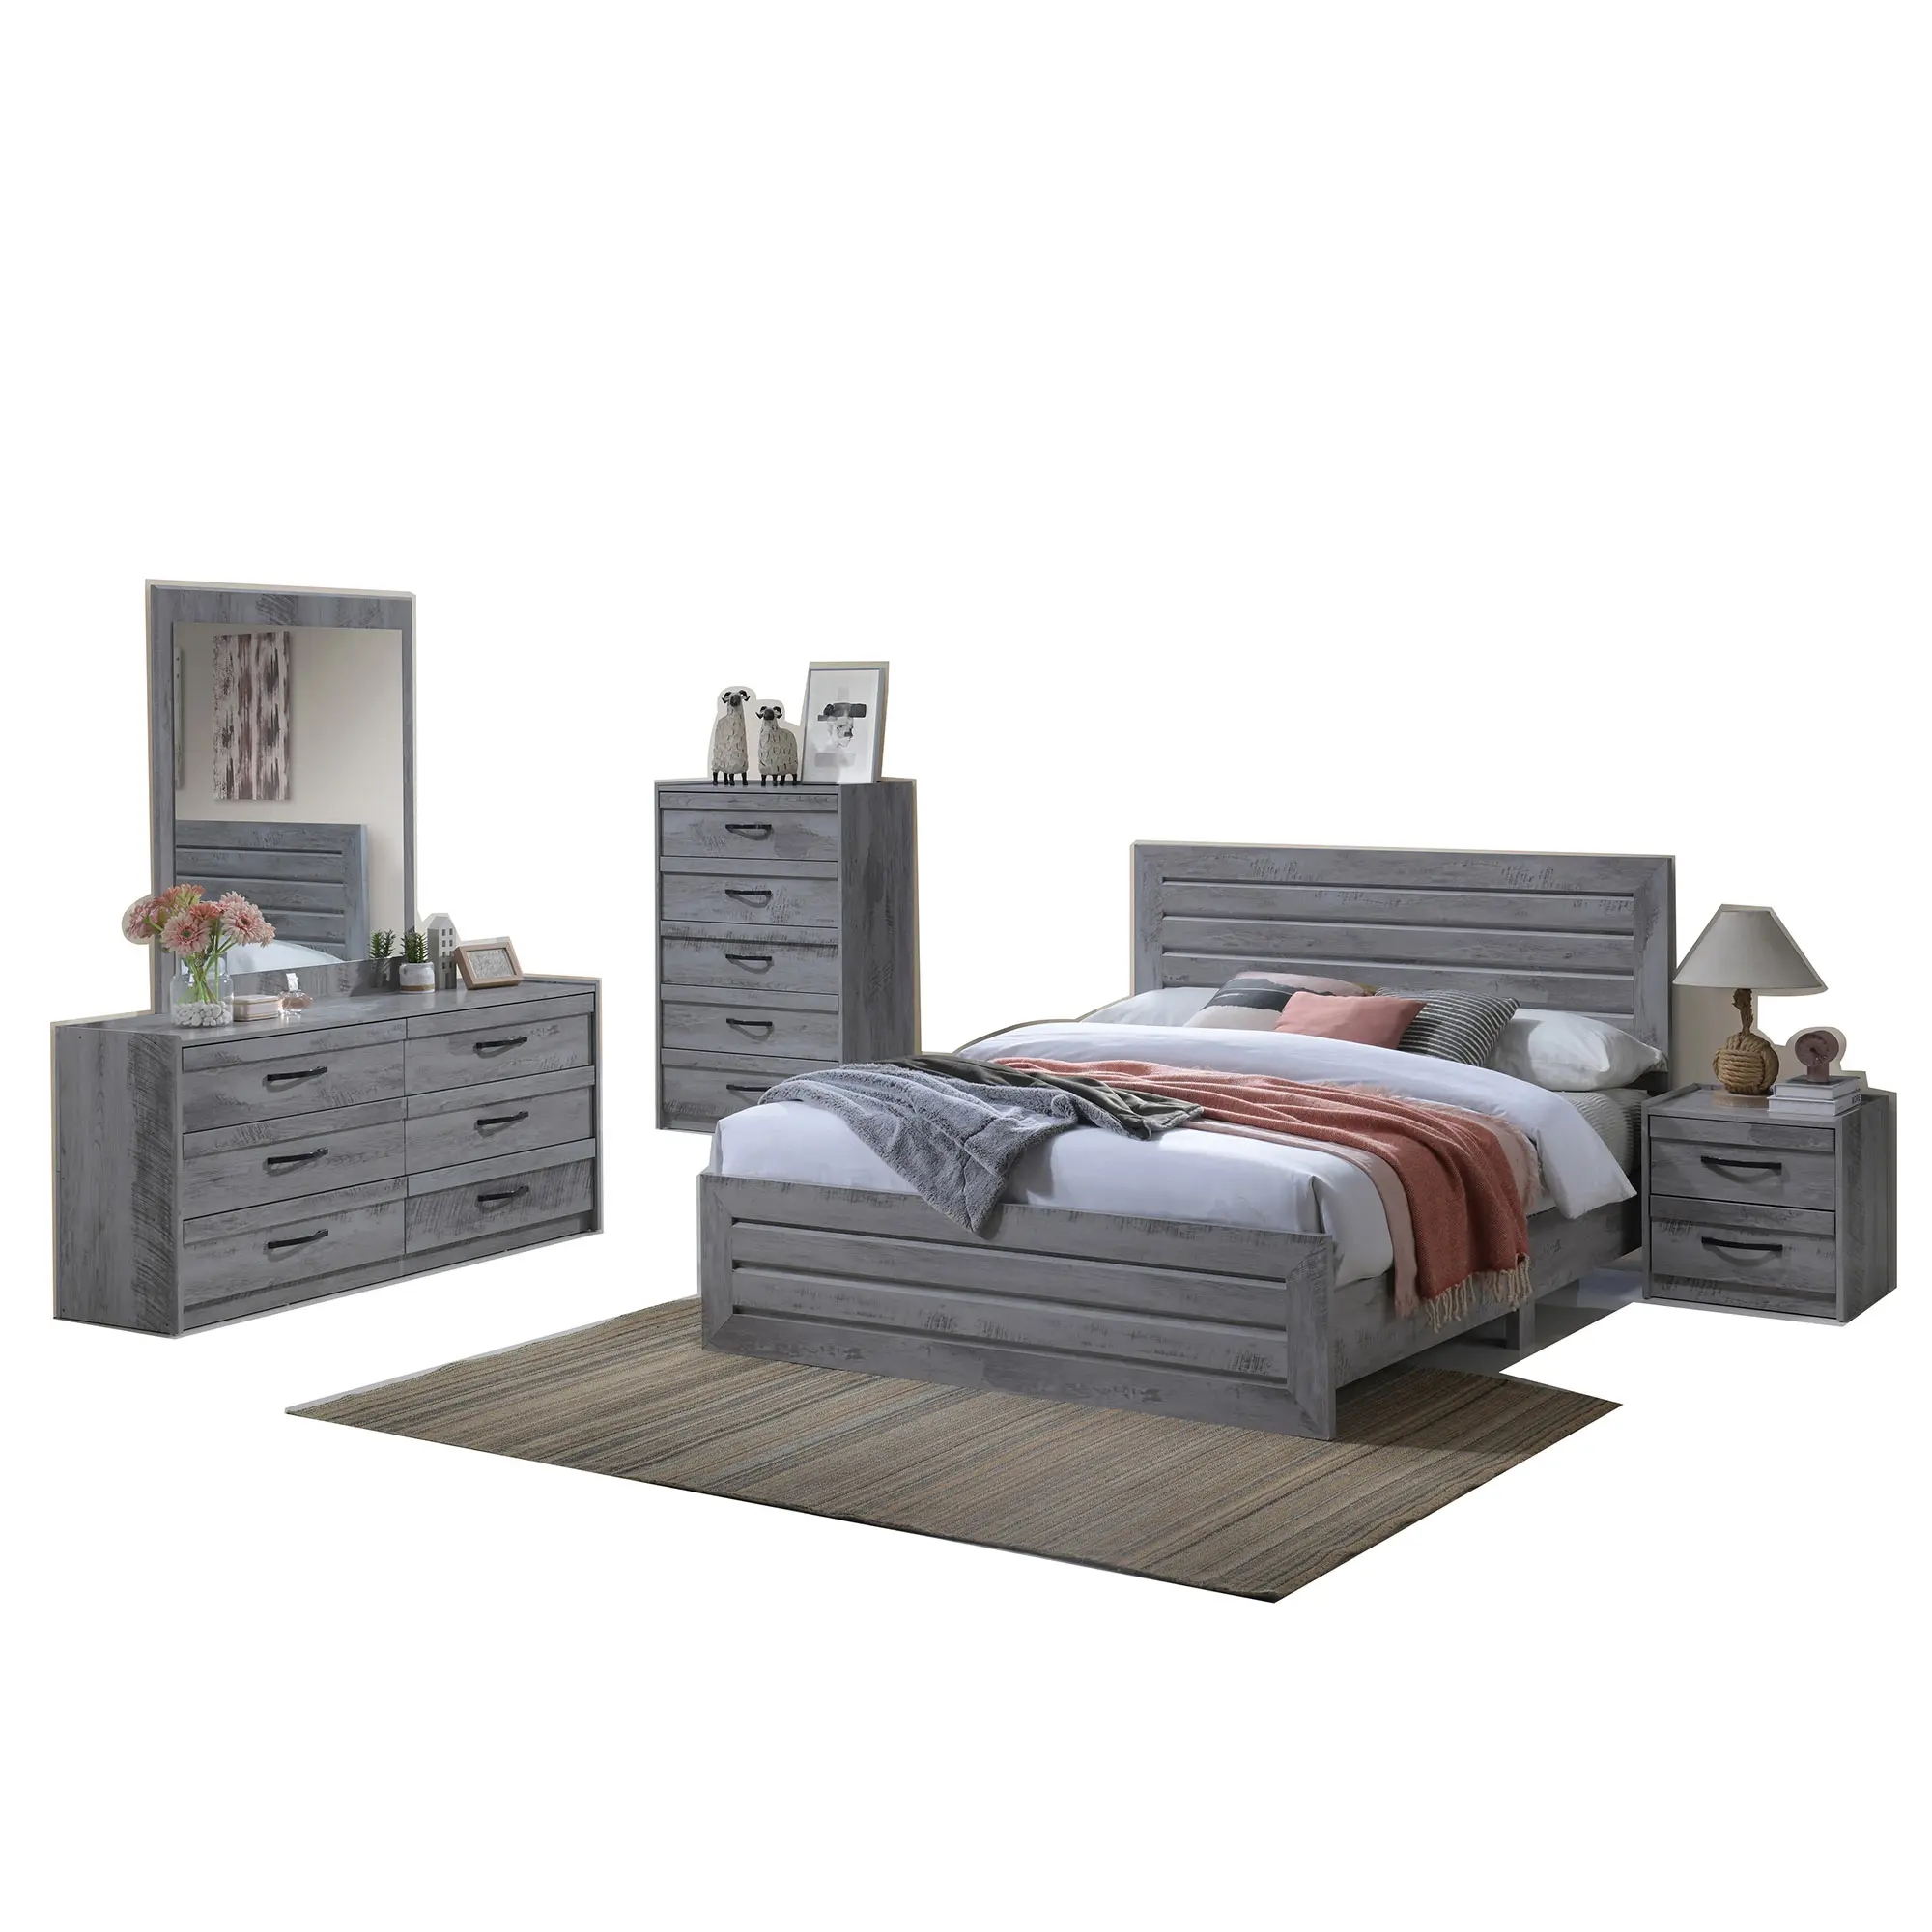 Hot Selling Eco-friendly Bedroom Full Set Comfort Sleeping Bed With 5 Drawers Chest & Dressing Table & Side Table With 2 Drawers